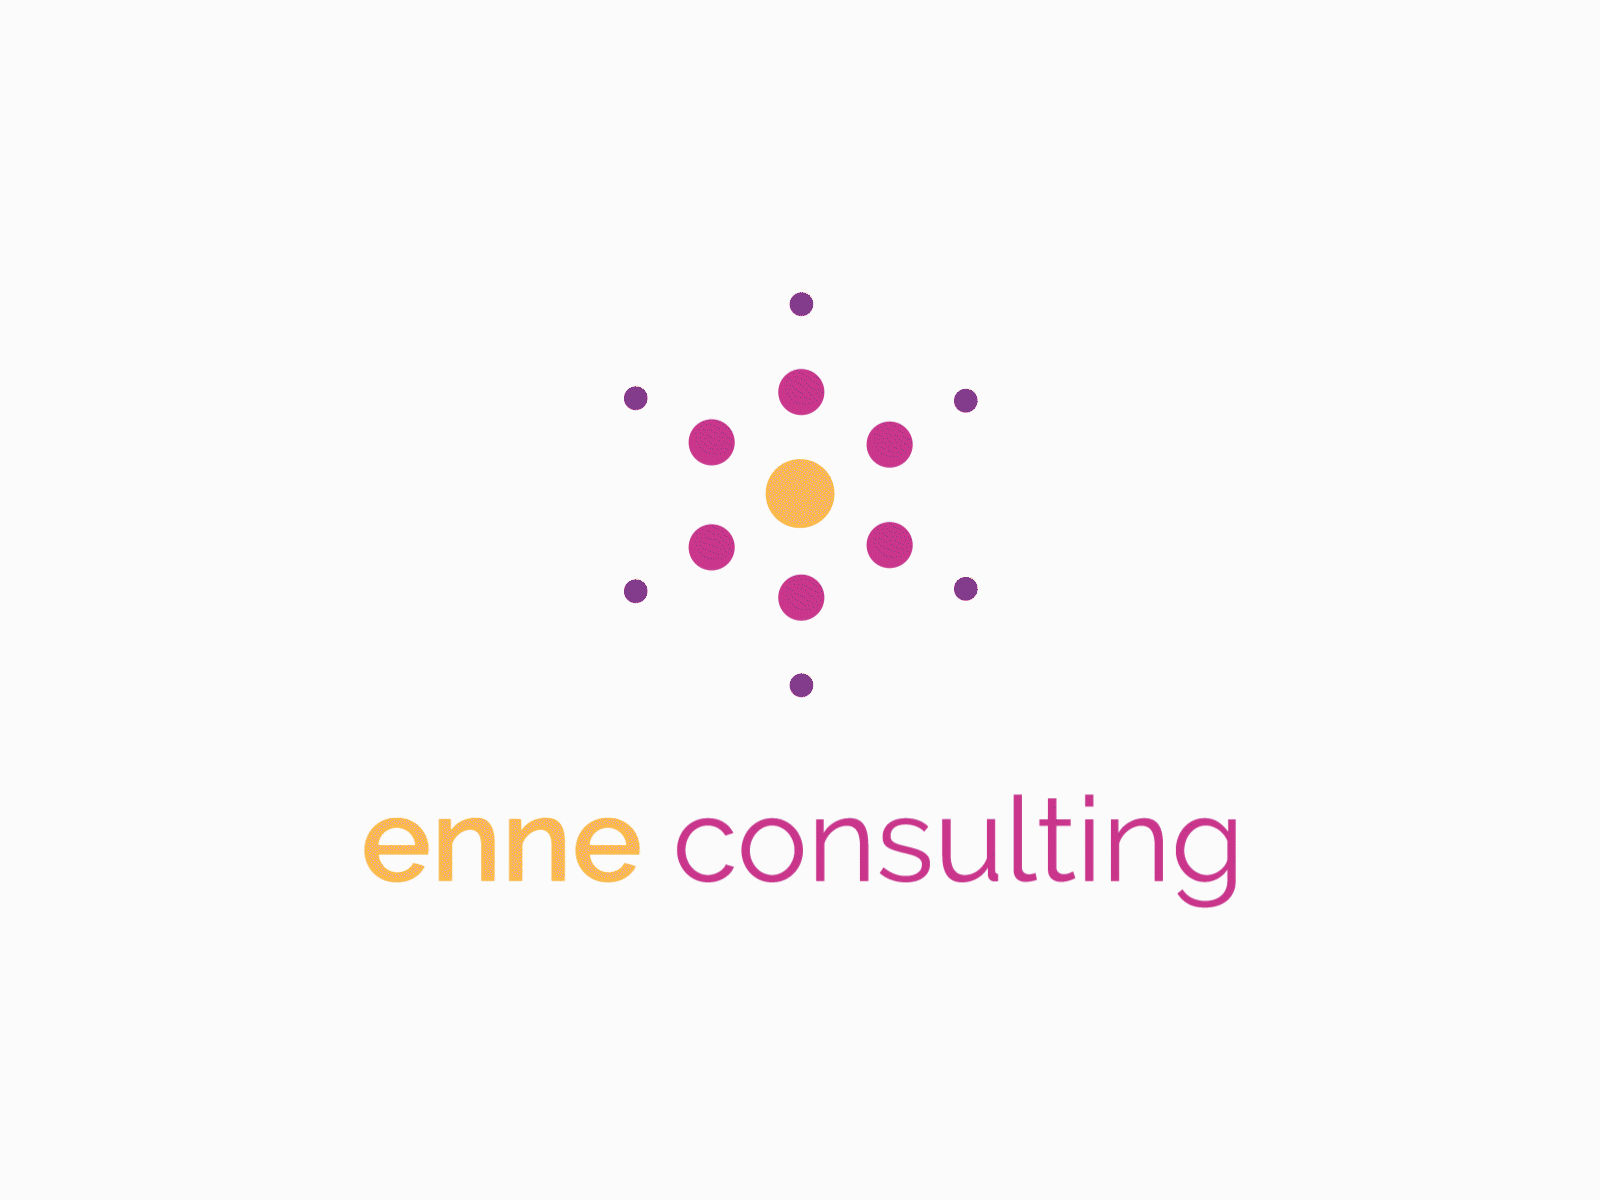 Enne consulting